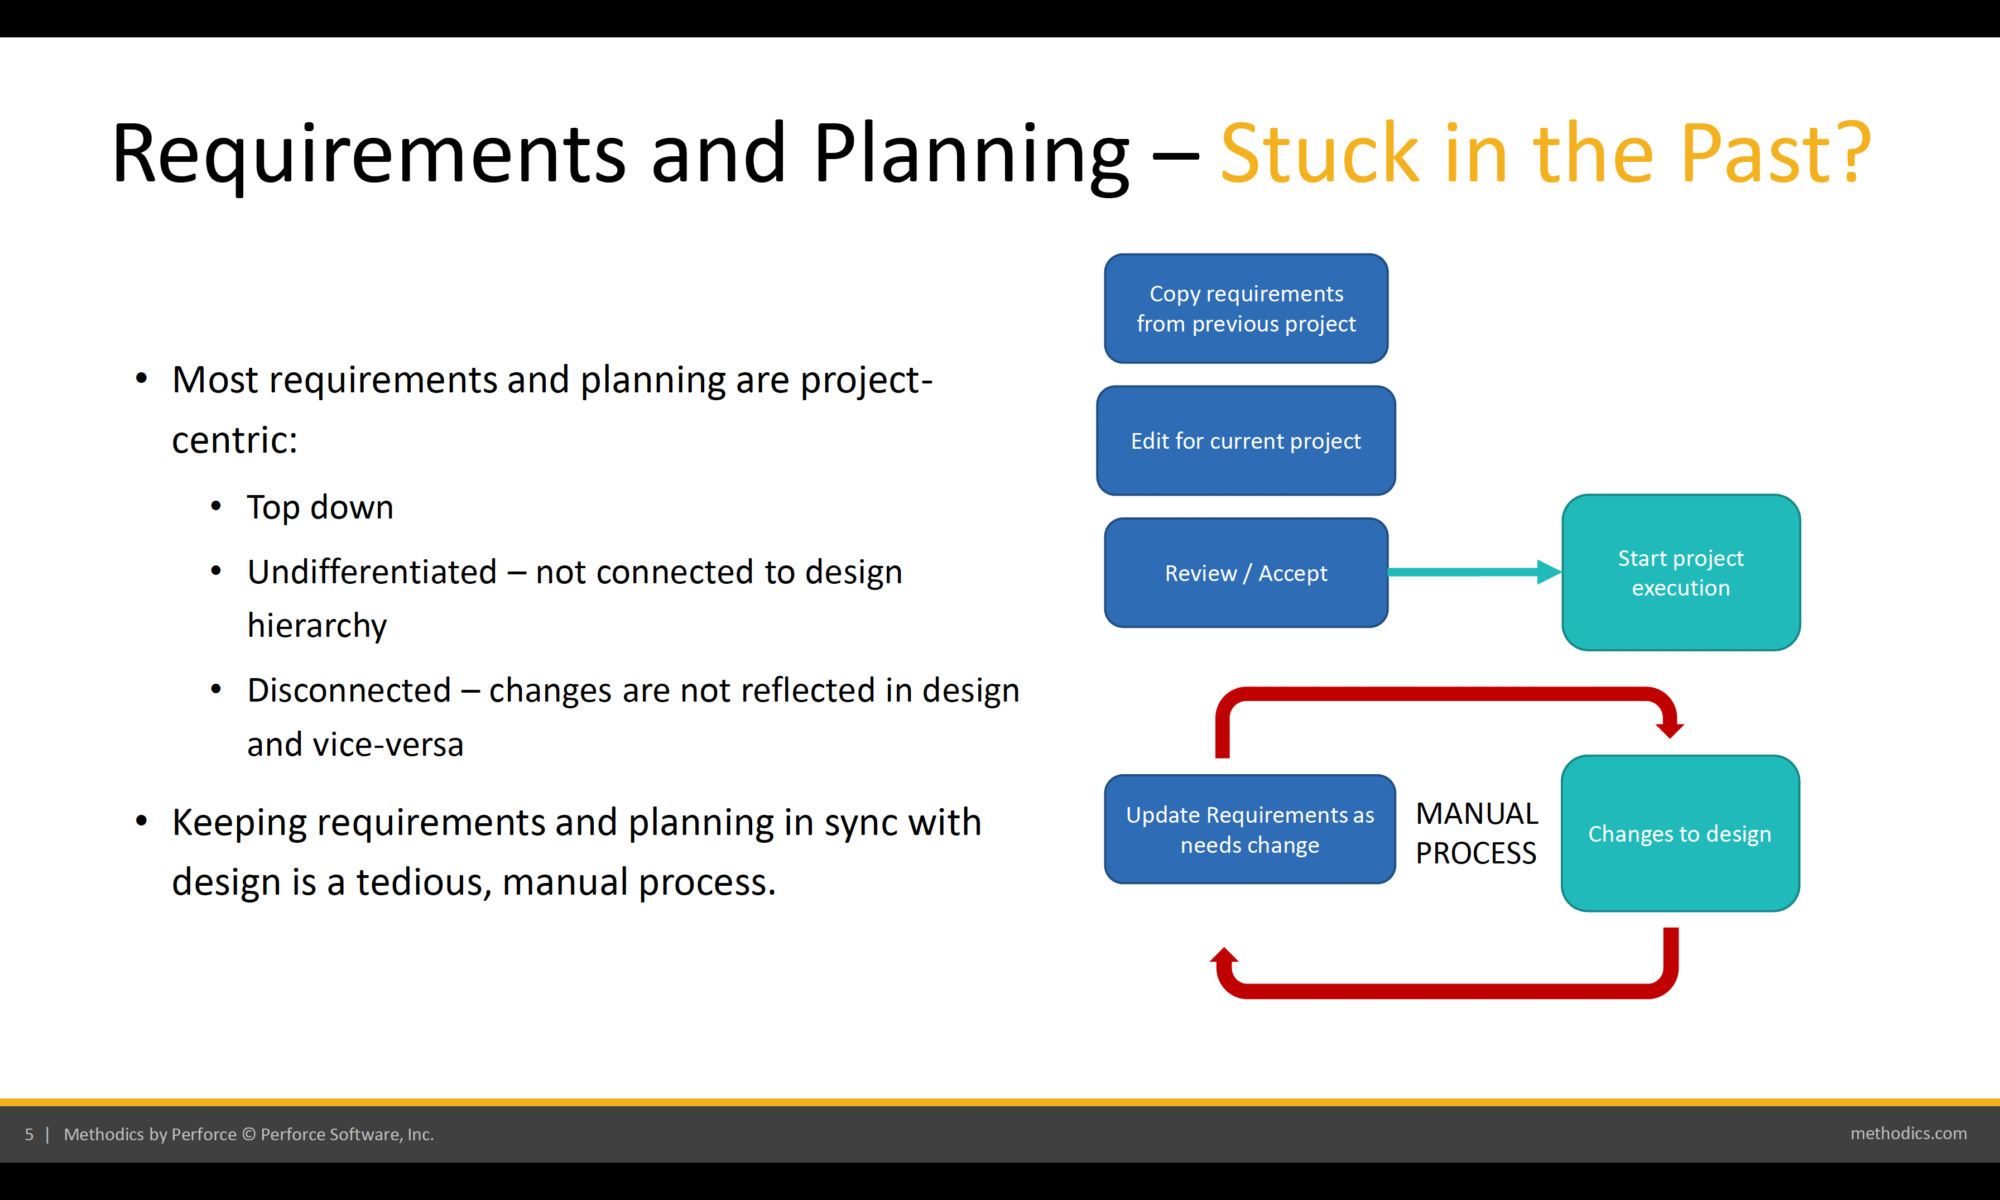 Requirements and Planning Stuck in the Past